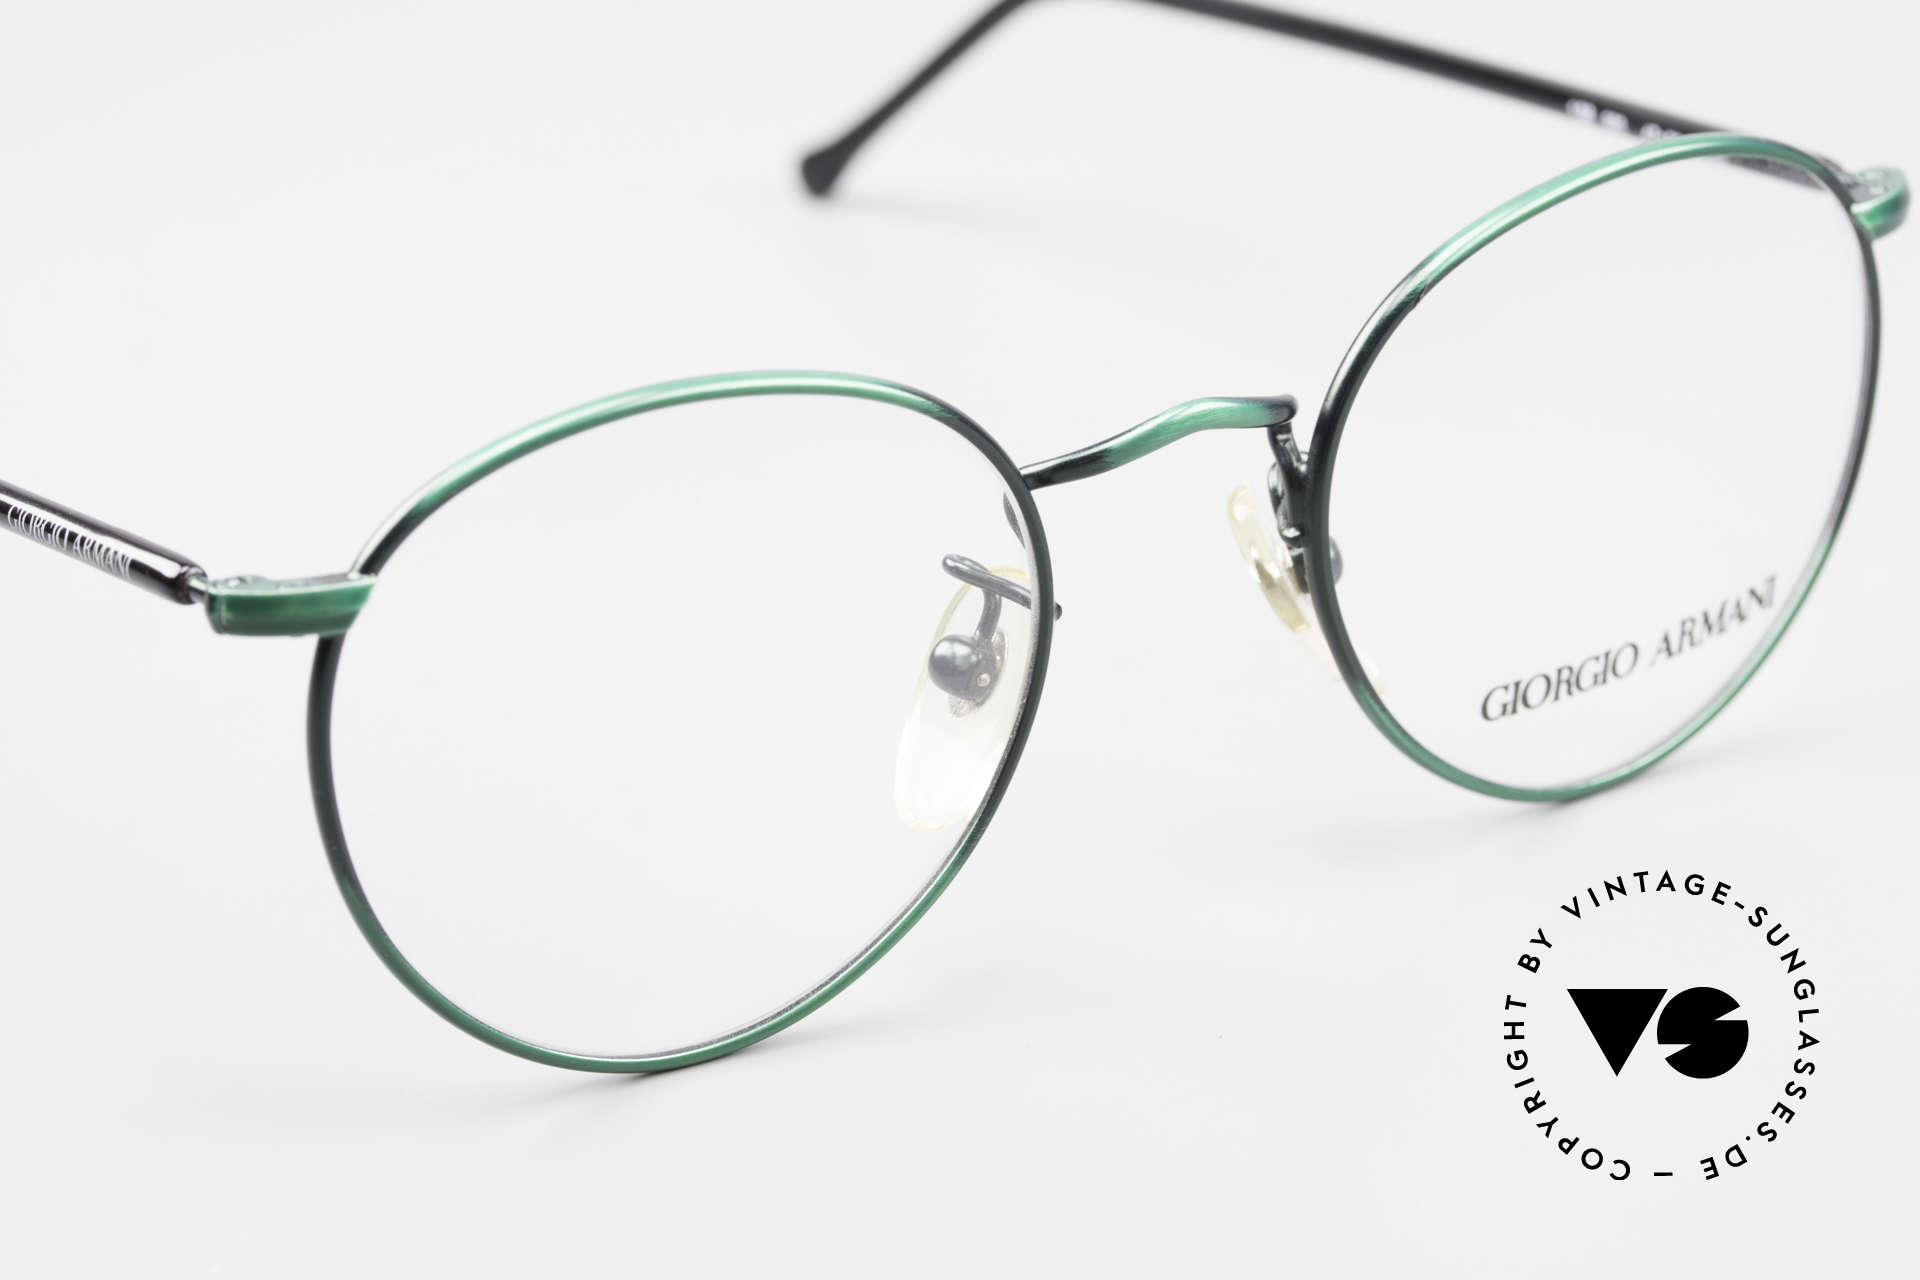 Giorgio Armani 138 Panto Frame Ladies And Gents, unworn (like all our vintage GIORGIO Armani frames), Made for Men and Women